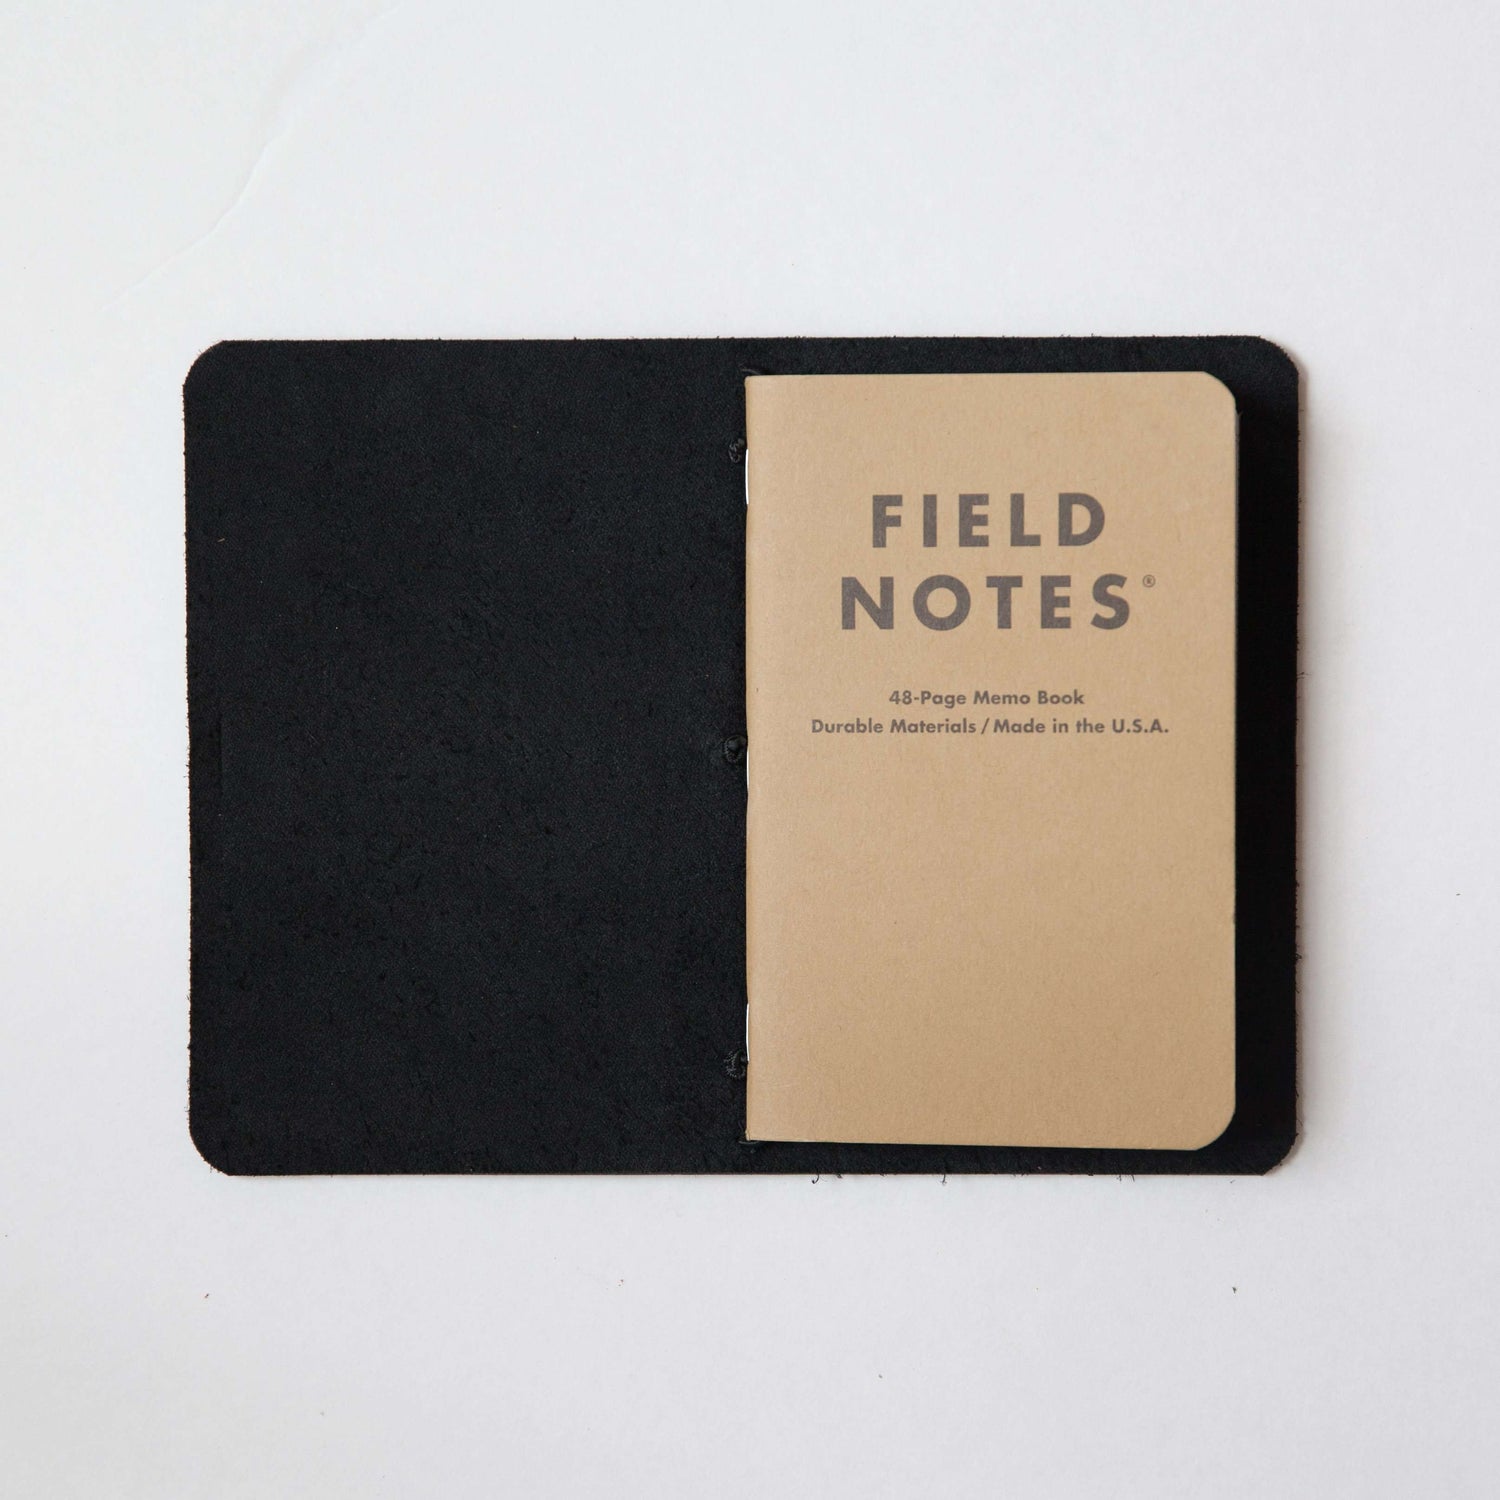 Traveler's Notebook Leather Cover - Black